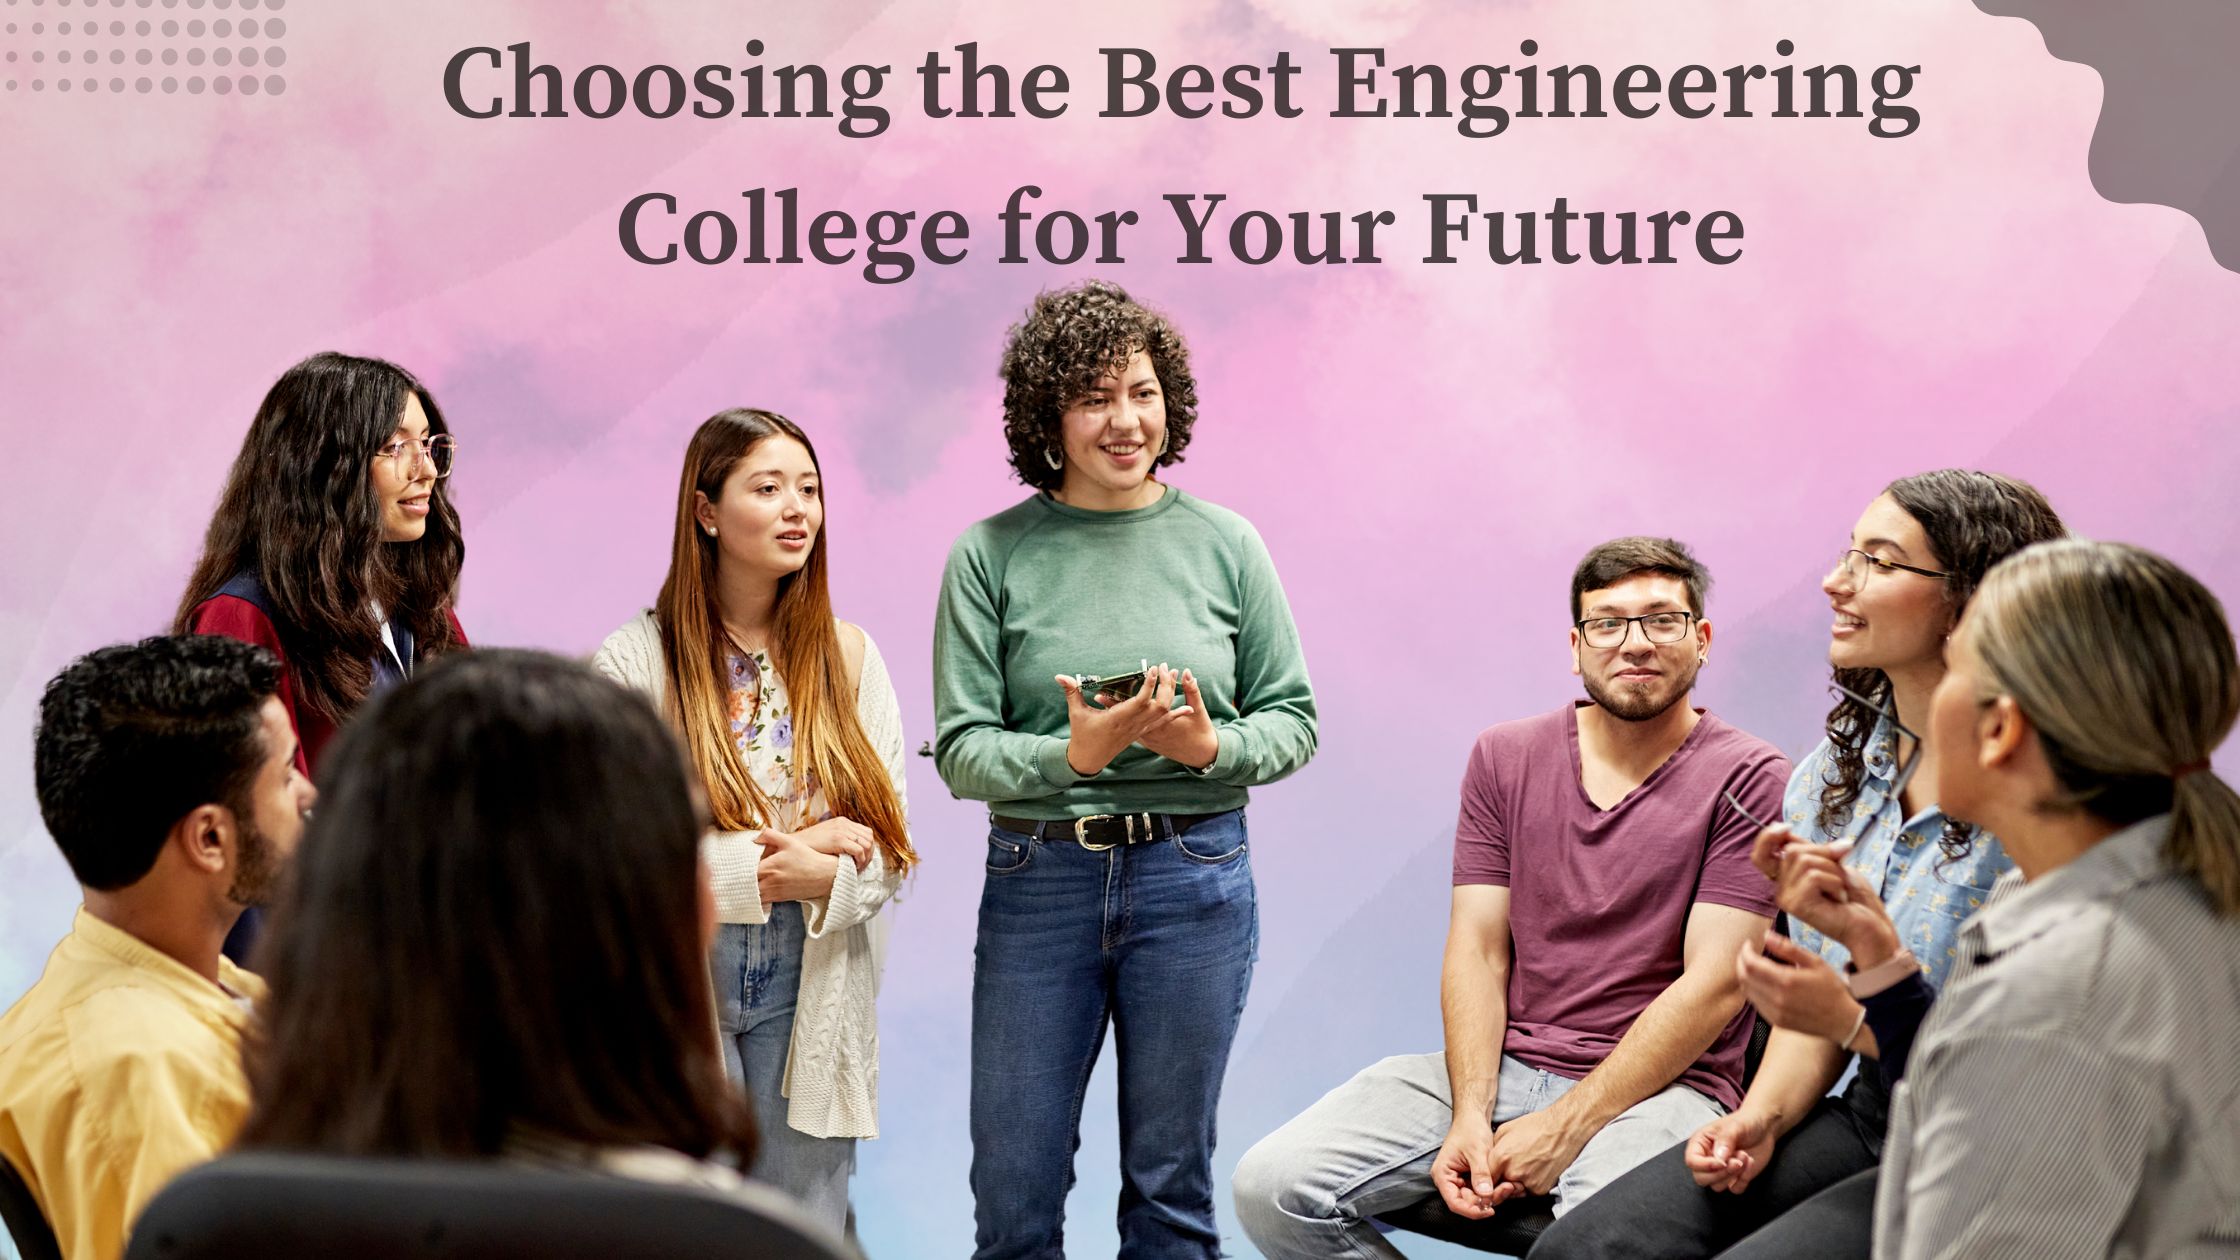 Choosing the Best Engineering College for Your Future